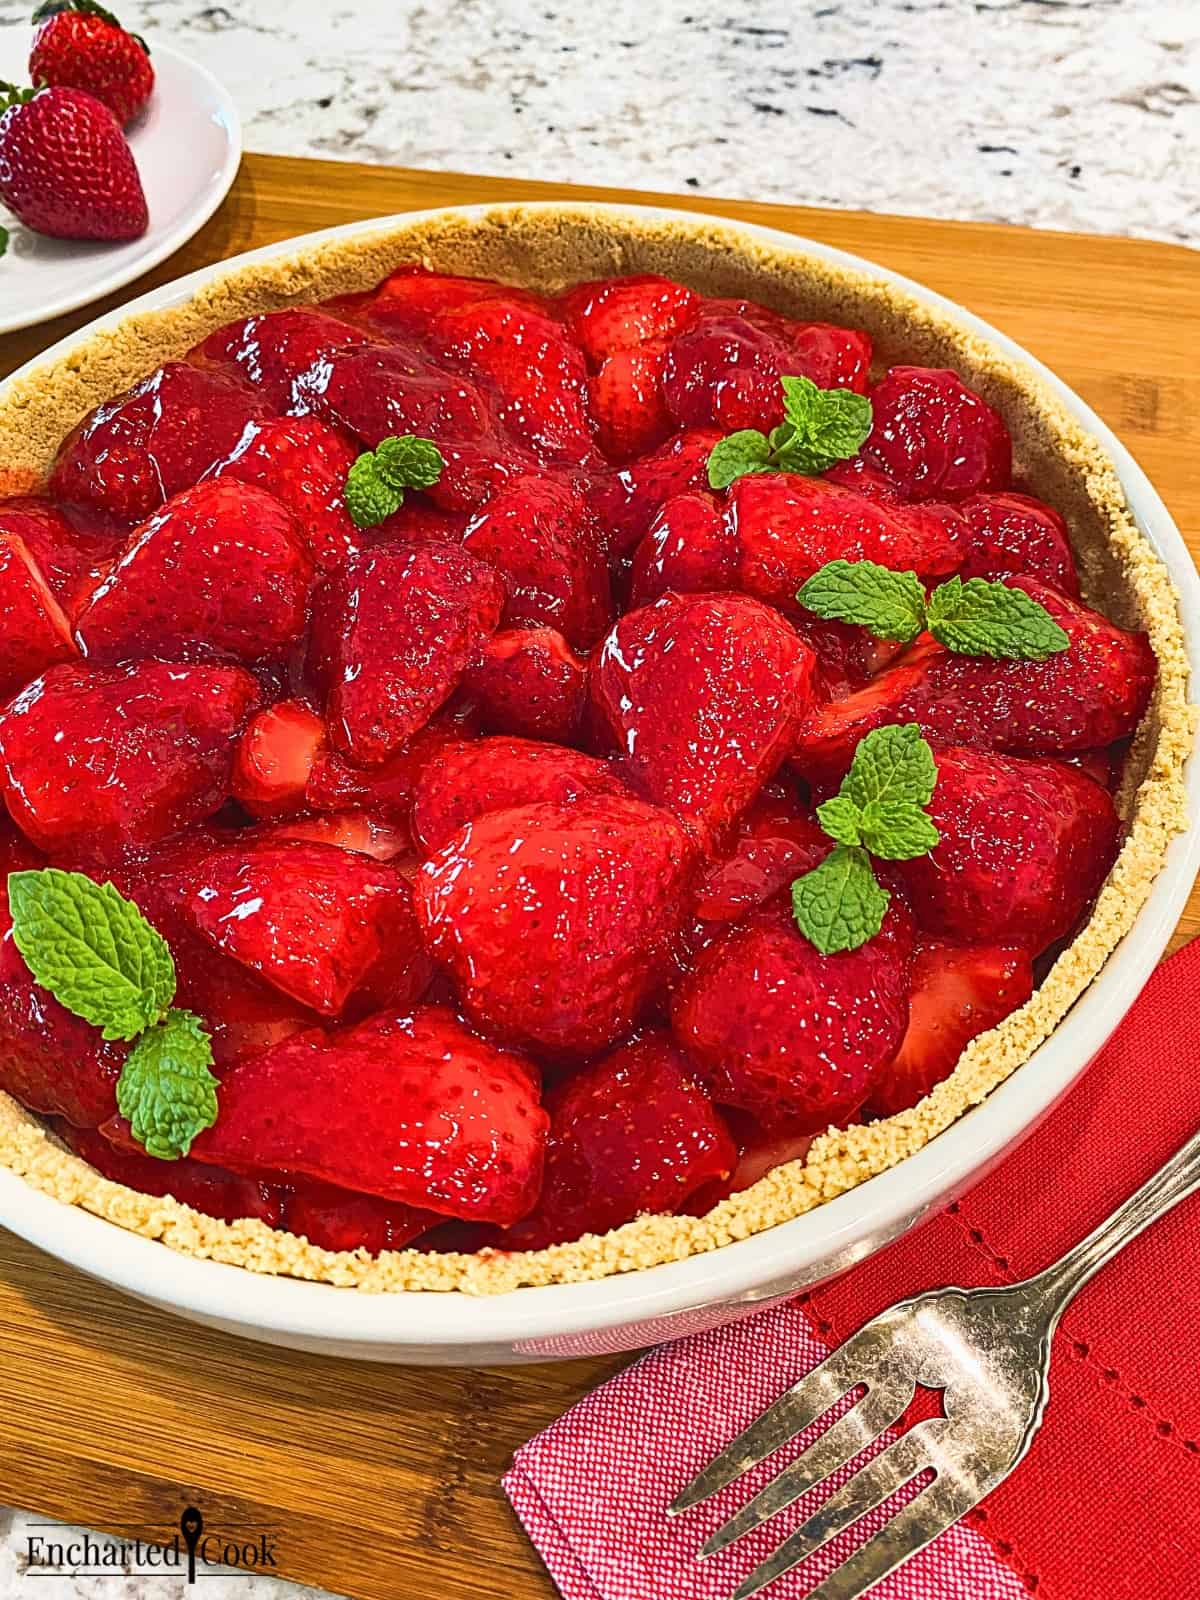 A whole strawberry pie garnished with fresh mint.